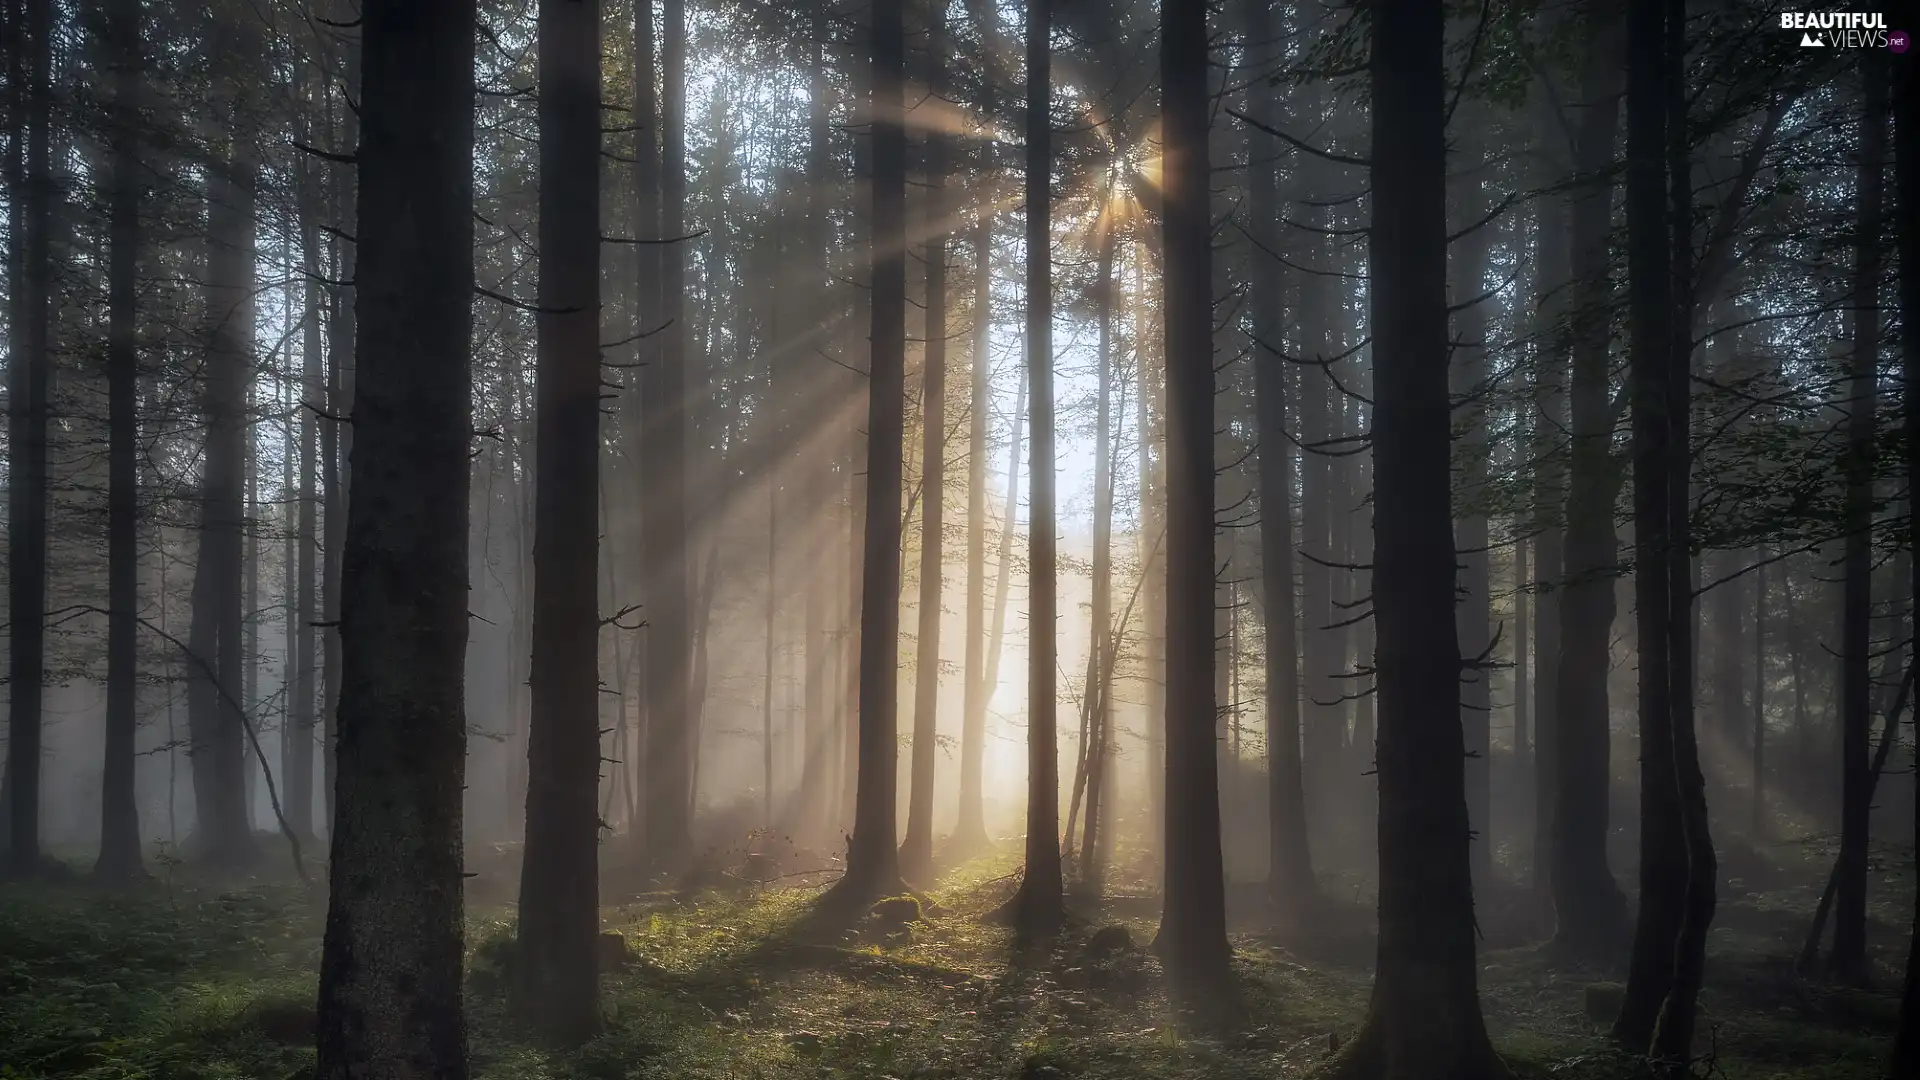 light breaking through sky, sunny, trees, viewes, forest